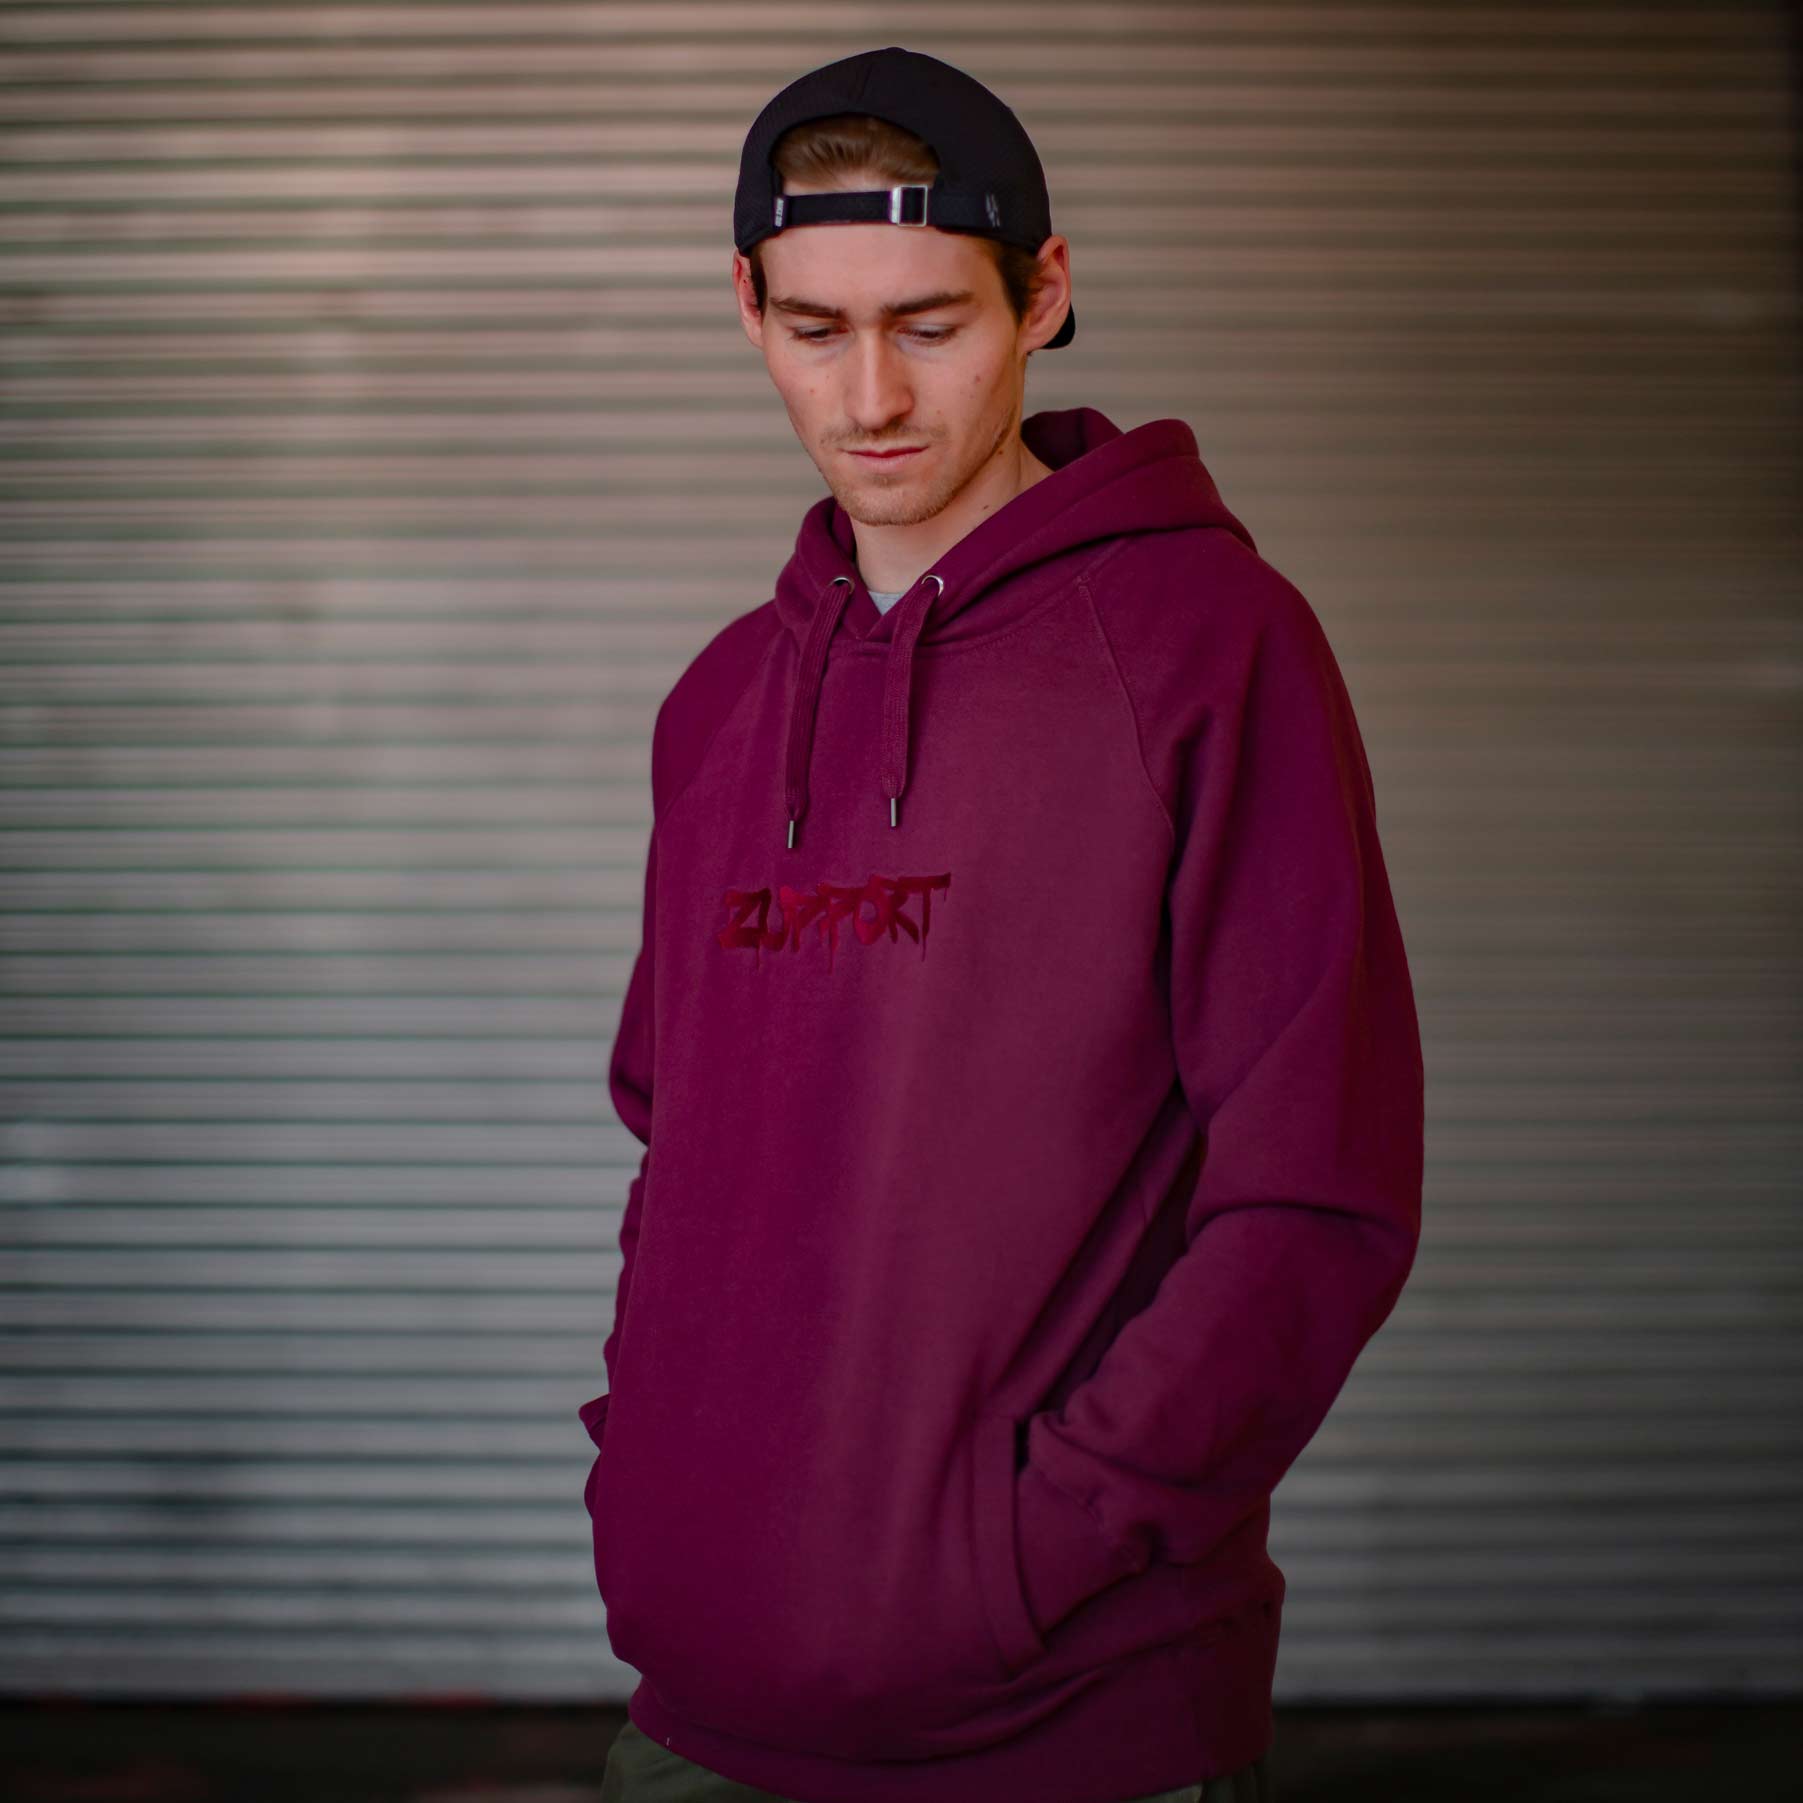 ZUPPORT stitched Tag Logo Hoody bordeaux